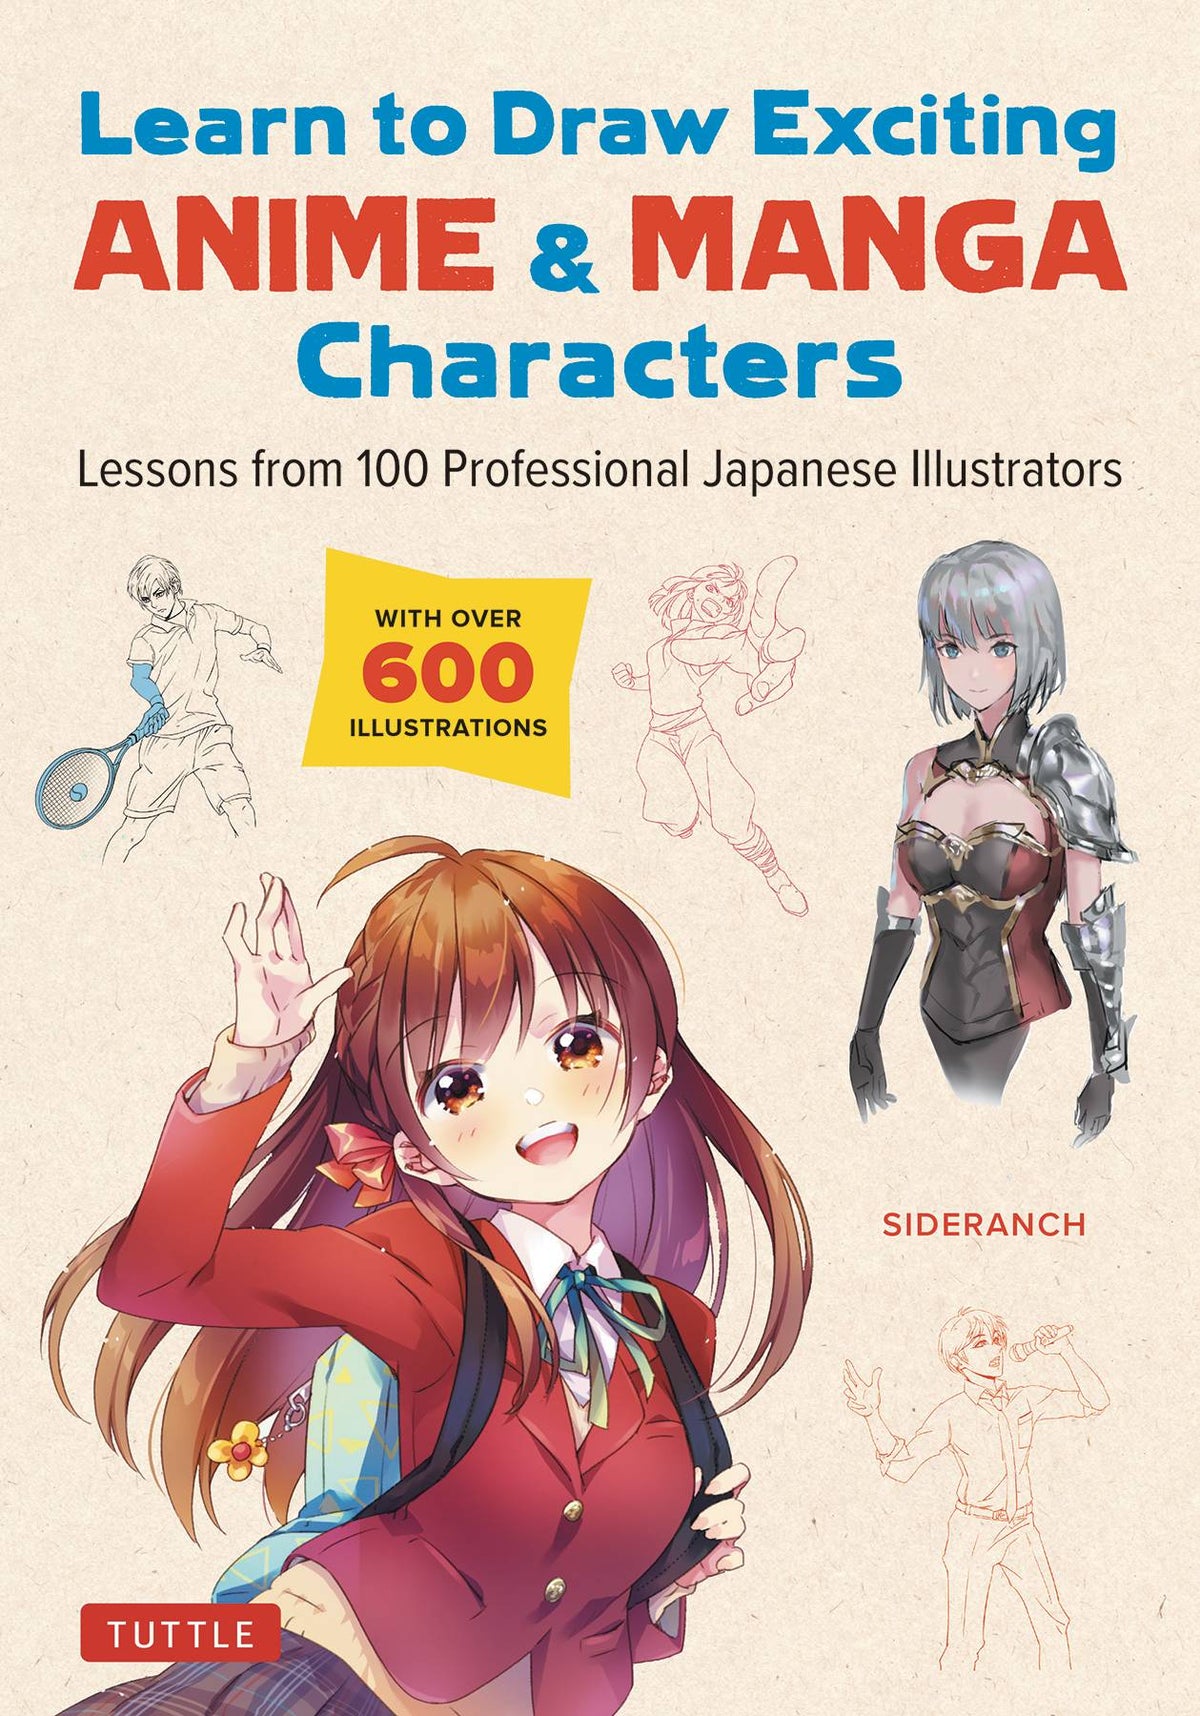 LEARN TO DRAW EXCITING ANIME & MANGA CHARACTERS SC - Third Eye